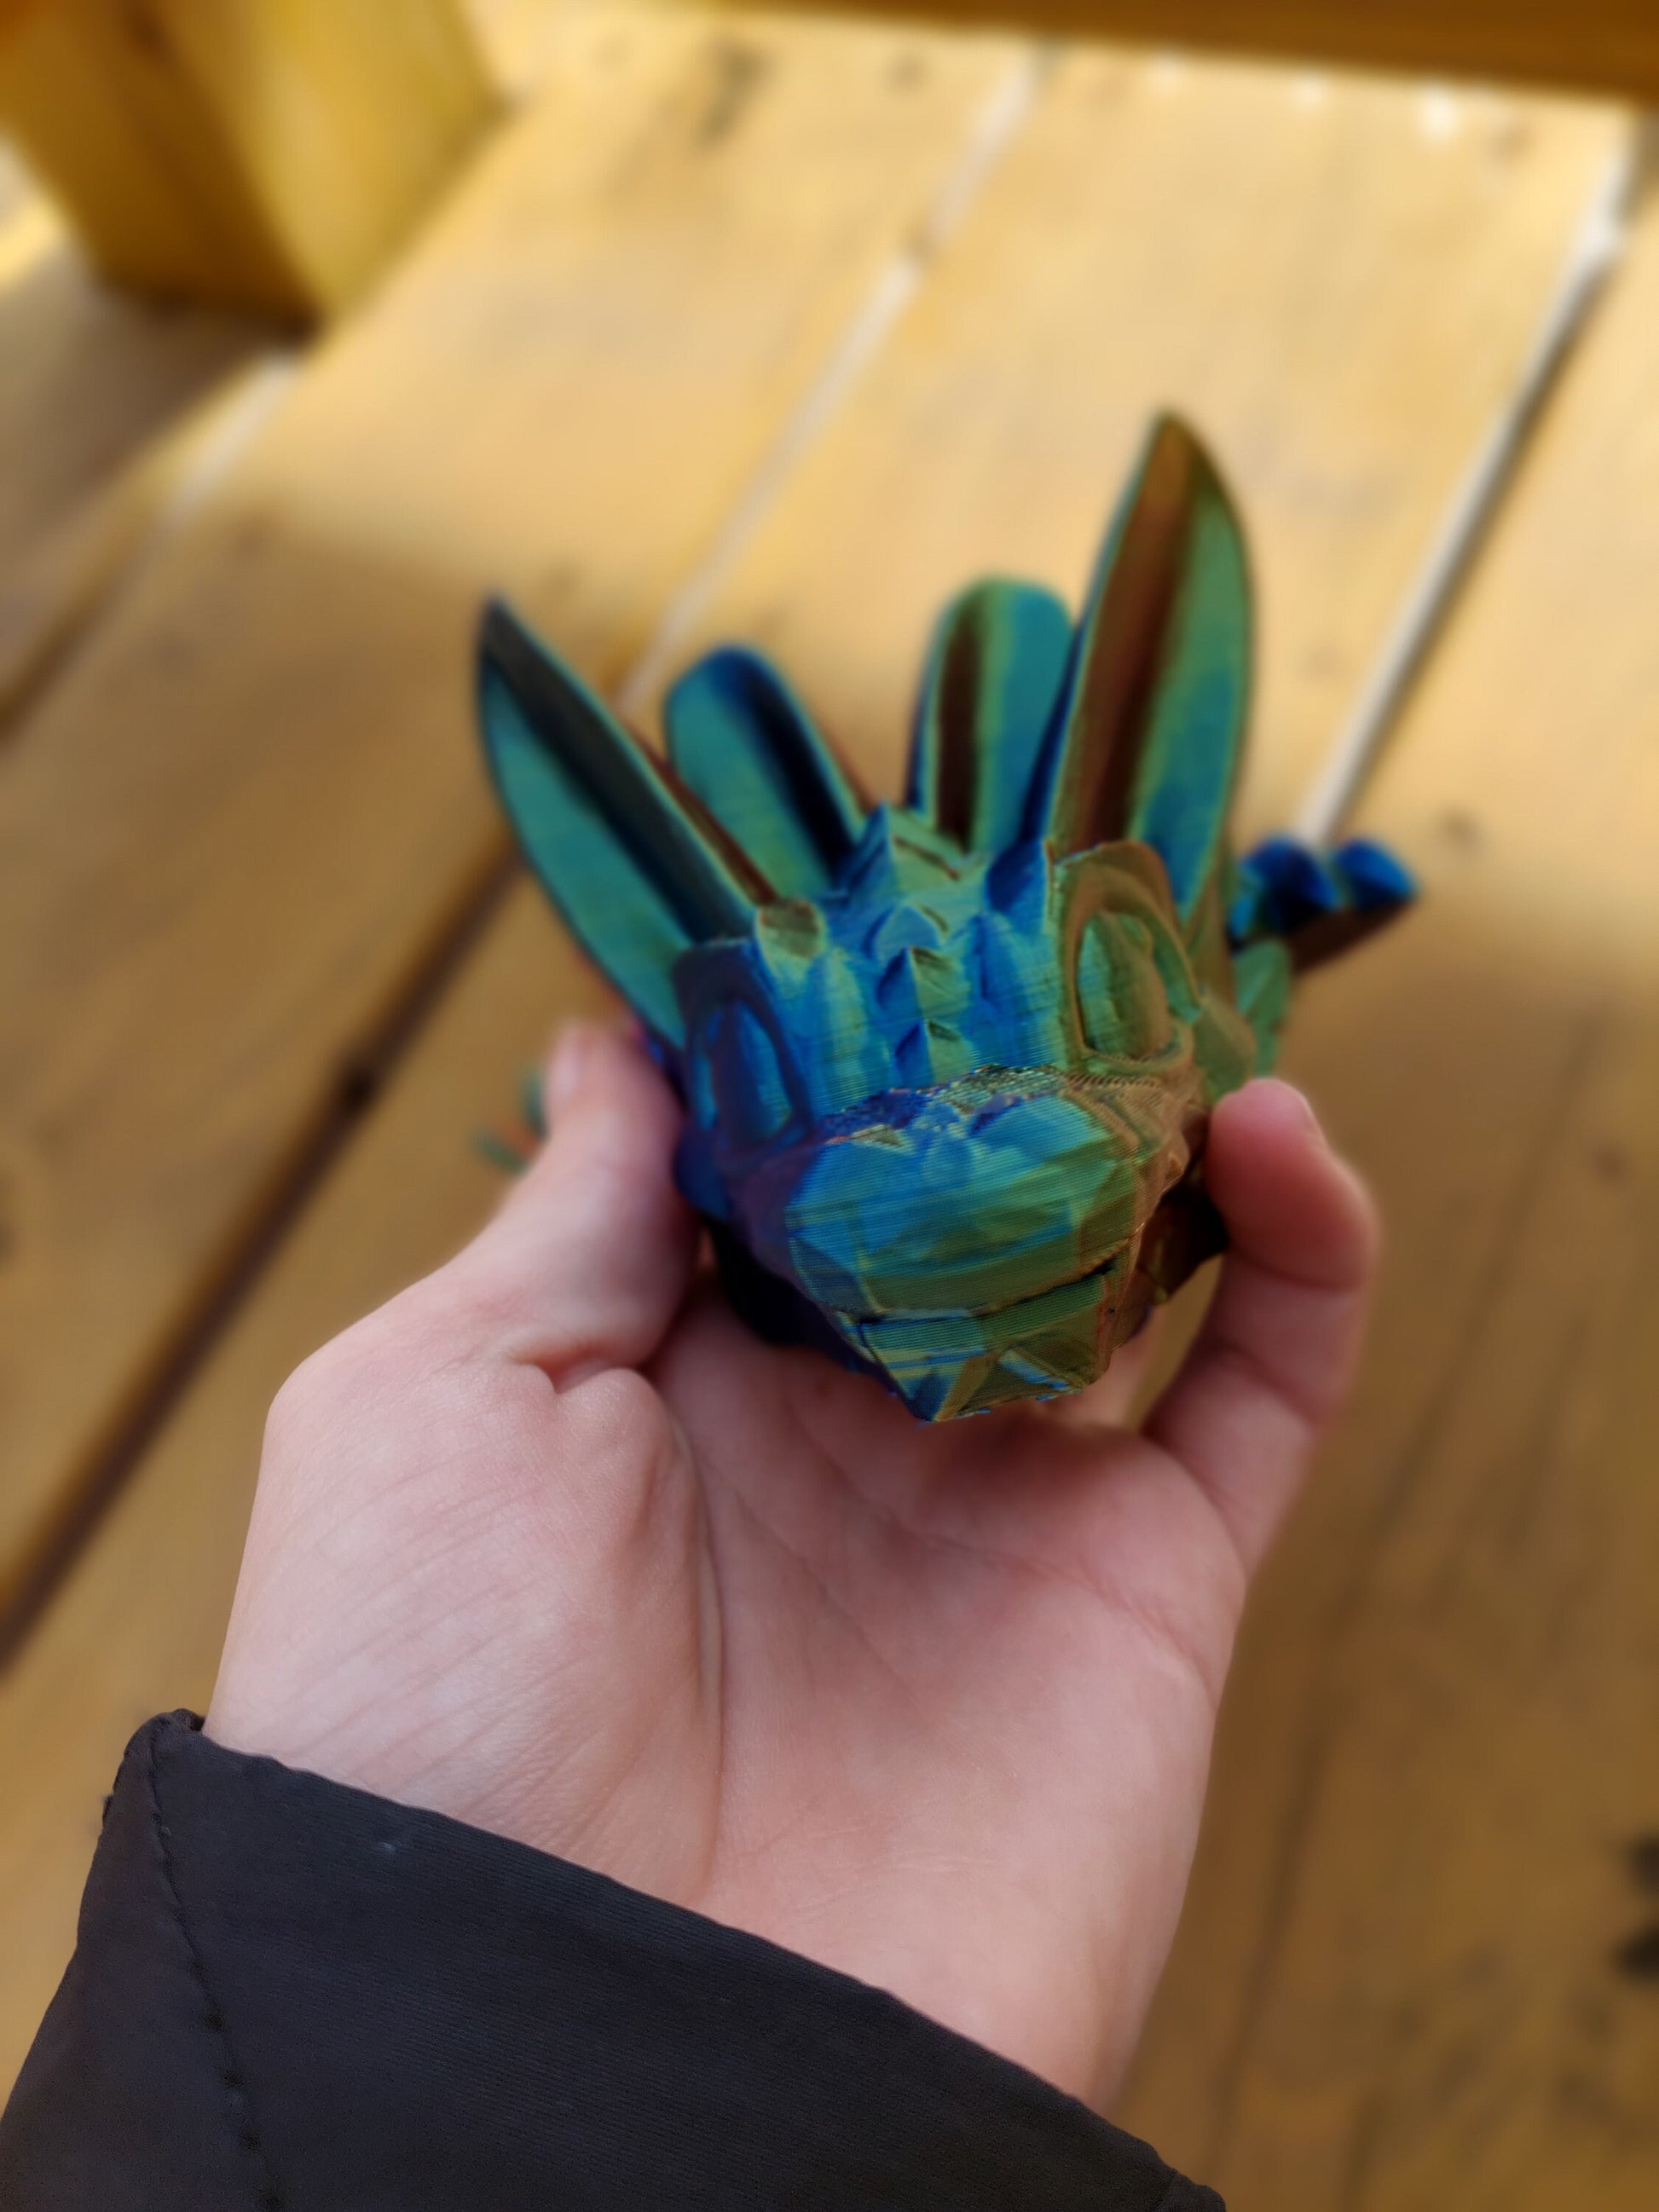 Articulated Easter Egg Dragon - Adult/Baby - 8 Sizes - Flexible Sensory Toy - Unique Gift